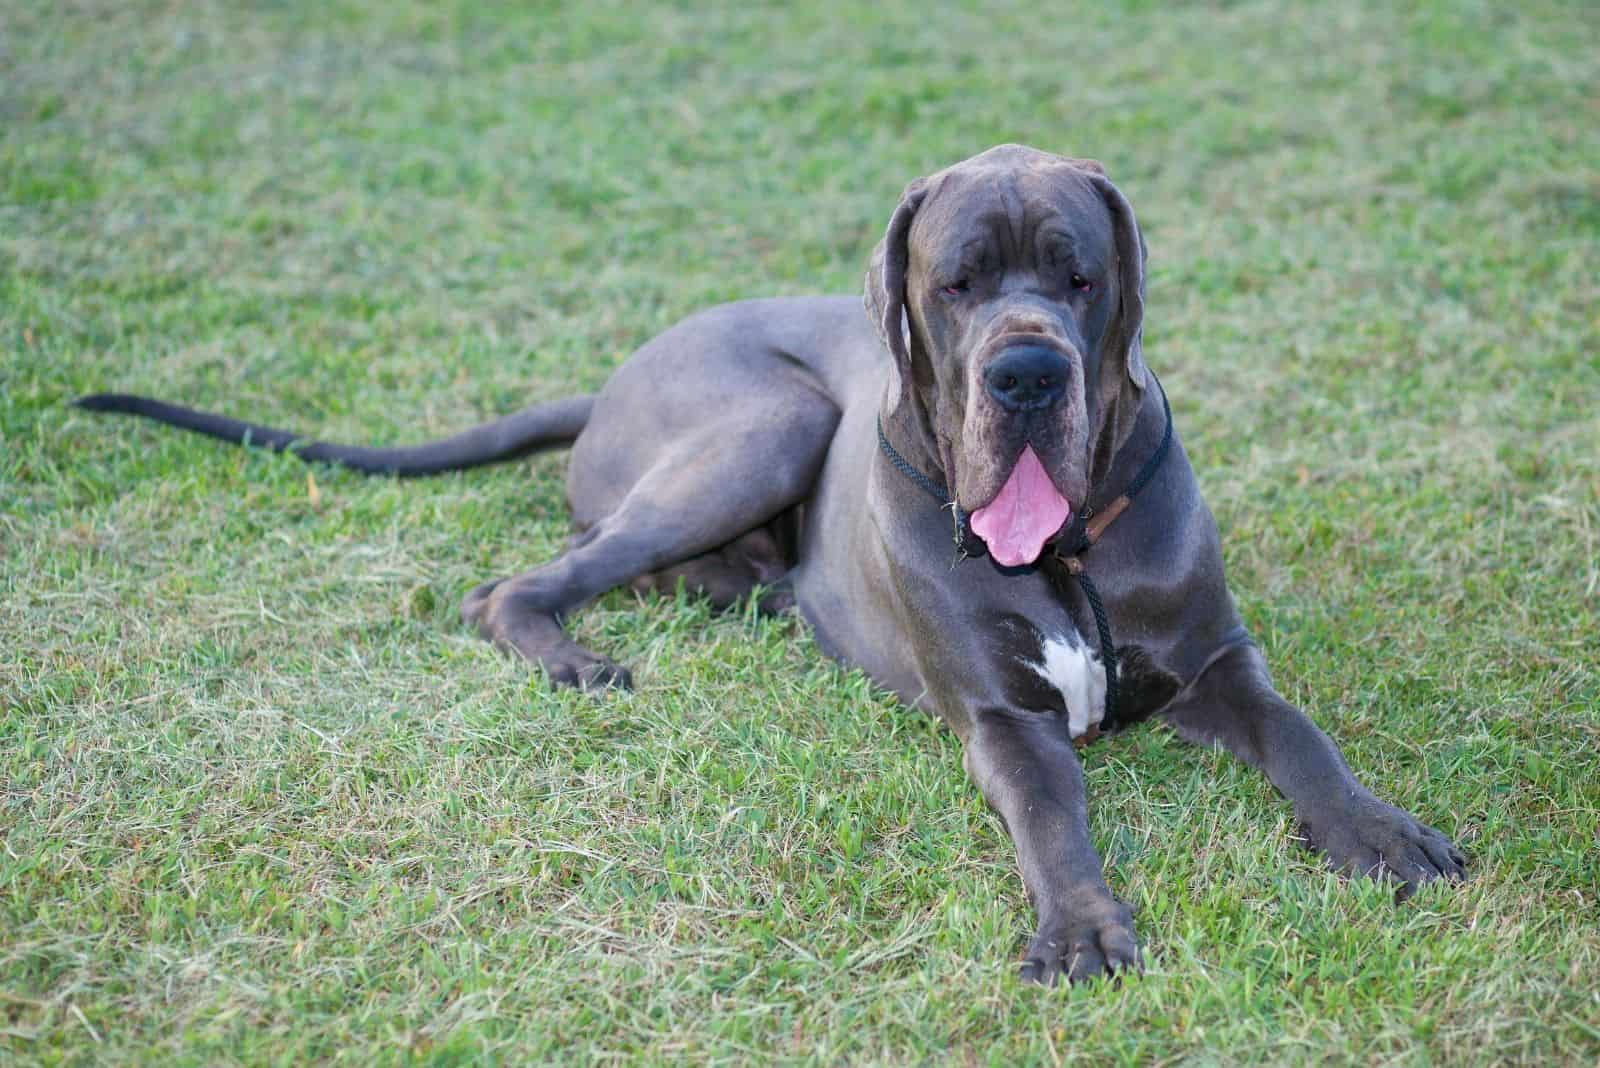 gray or blue great dane lying down on the grassy lawn